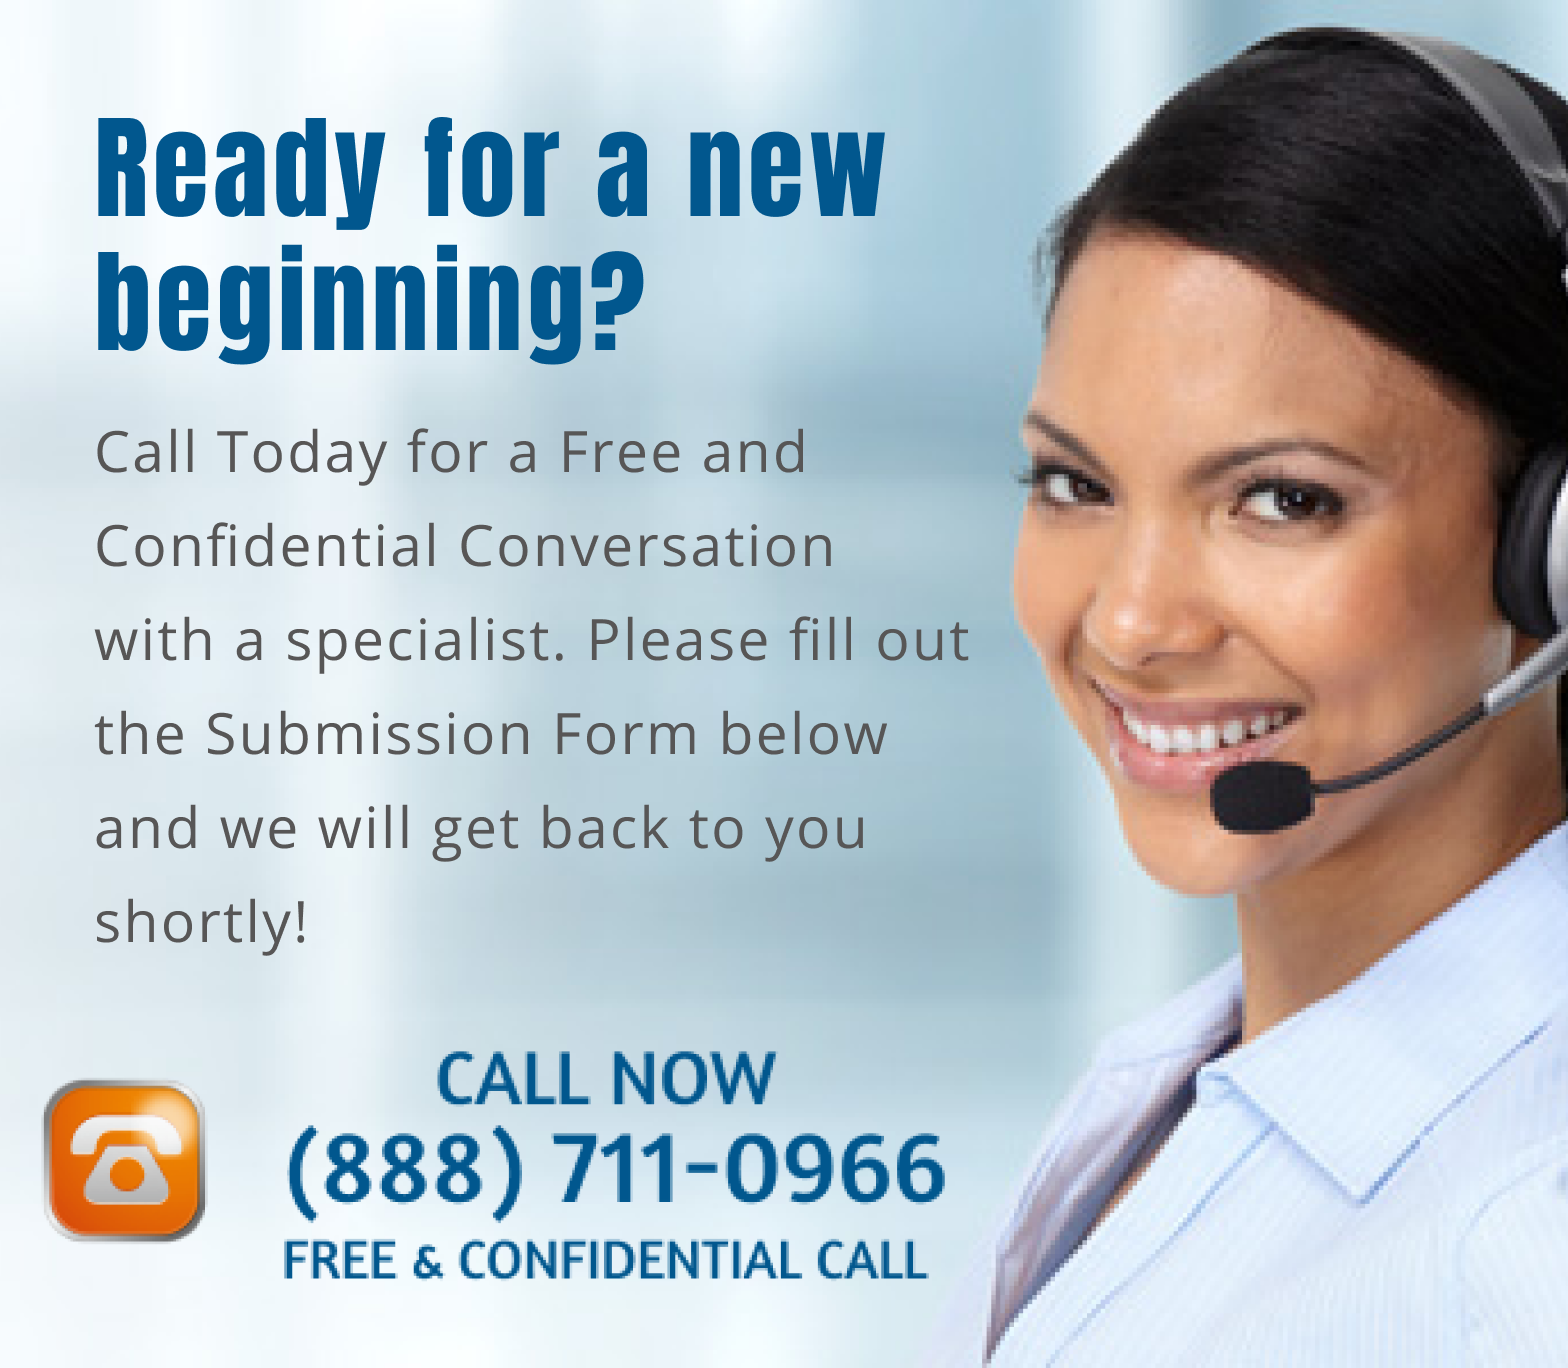 Ready for a new beginning? Call today for a free confidential conversation with a specialist. Please fill out the submission from and we will get back to you shortly! Call now (888) 711-0966 - Free and confidential call